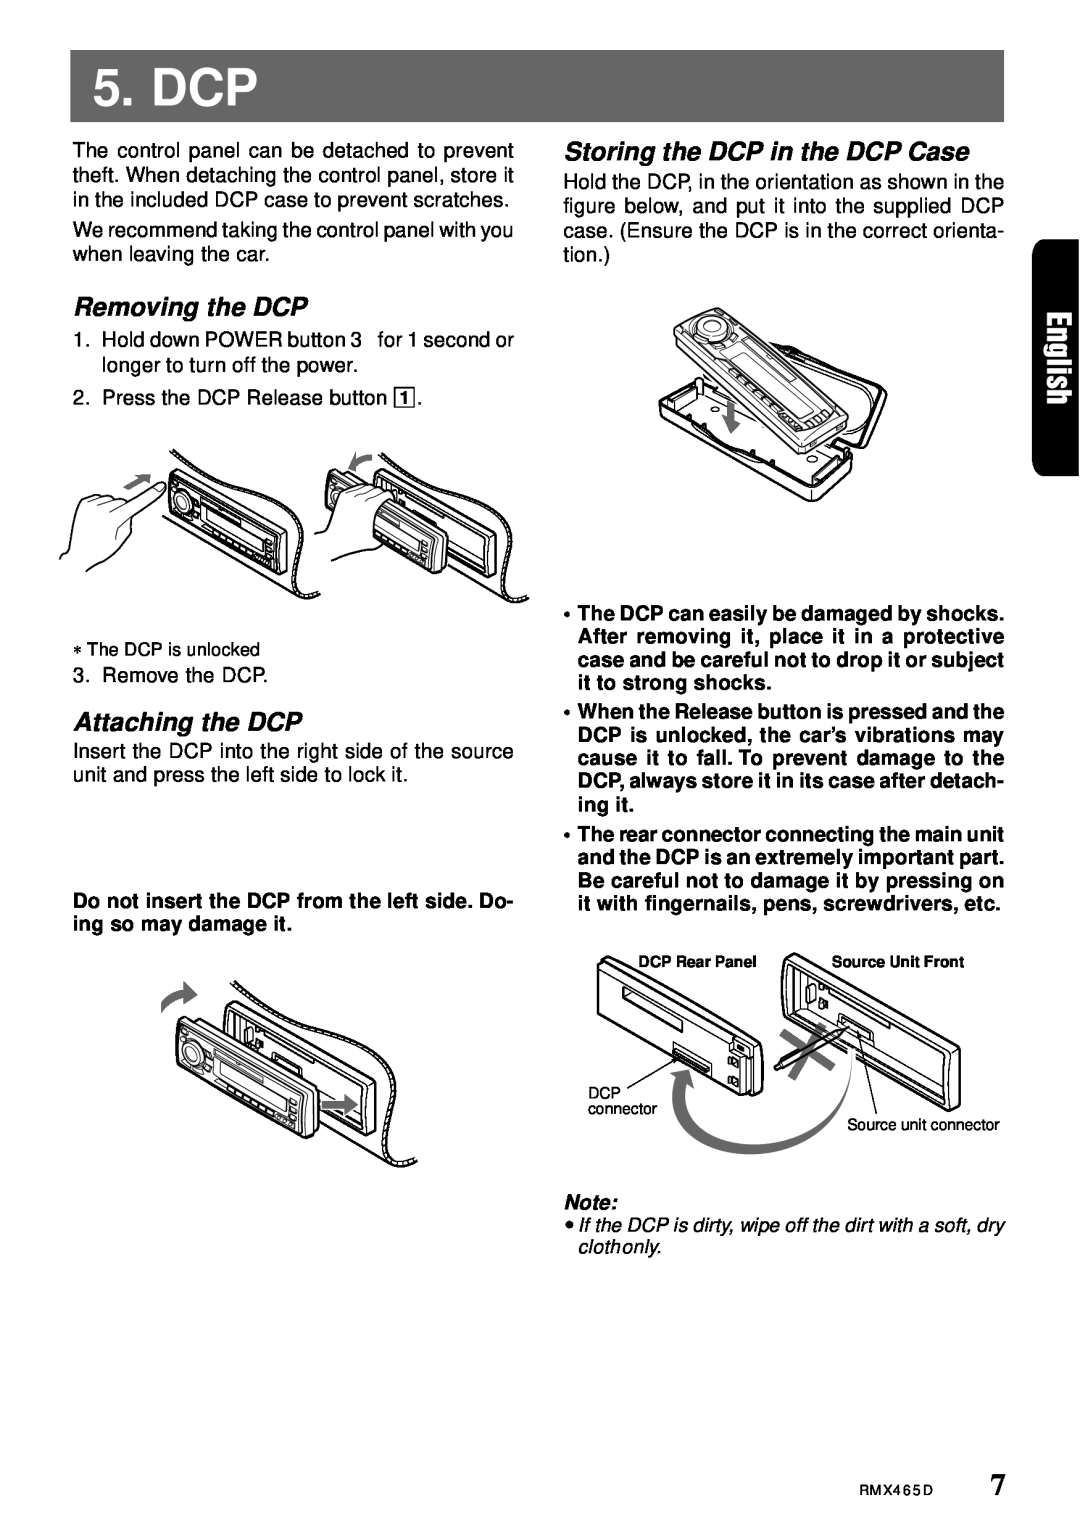 Clarion RMX465D owner manual Dcp, Storing the DCP in the DCP Case, Removing the DCP, Attaching the DCP 